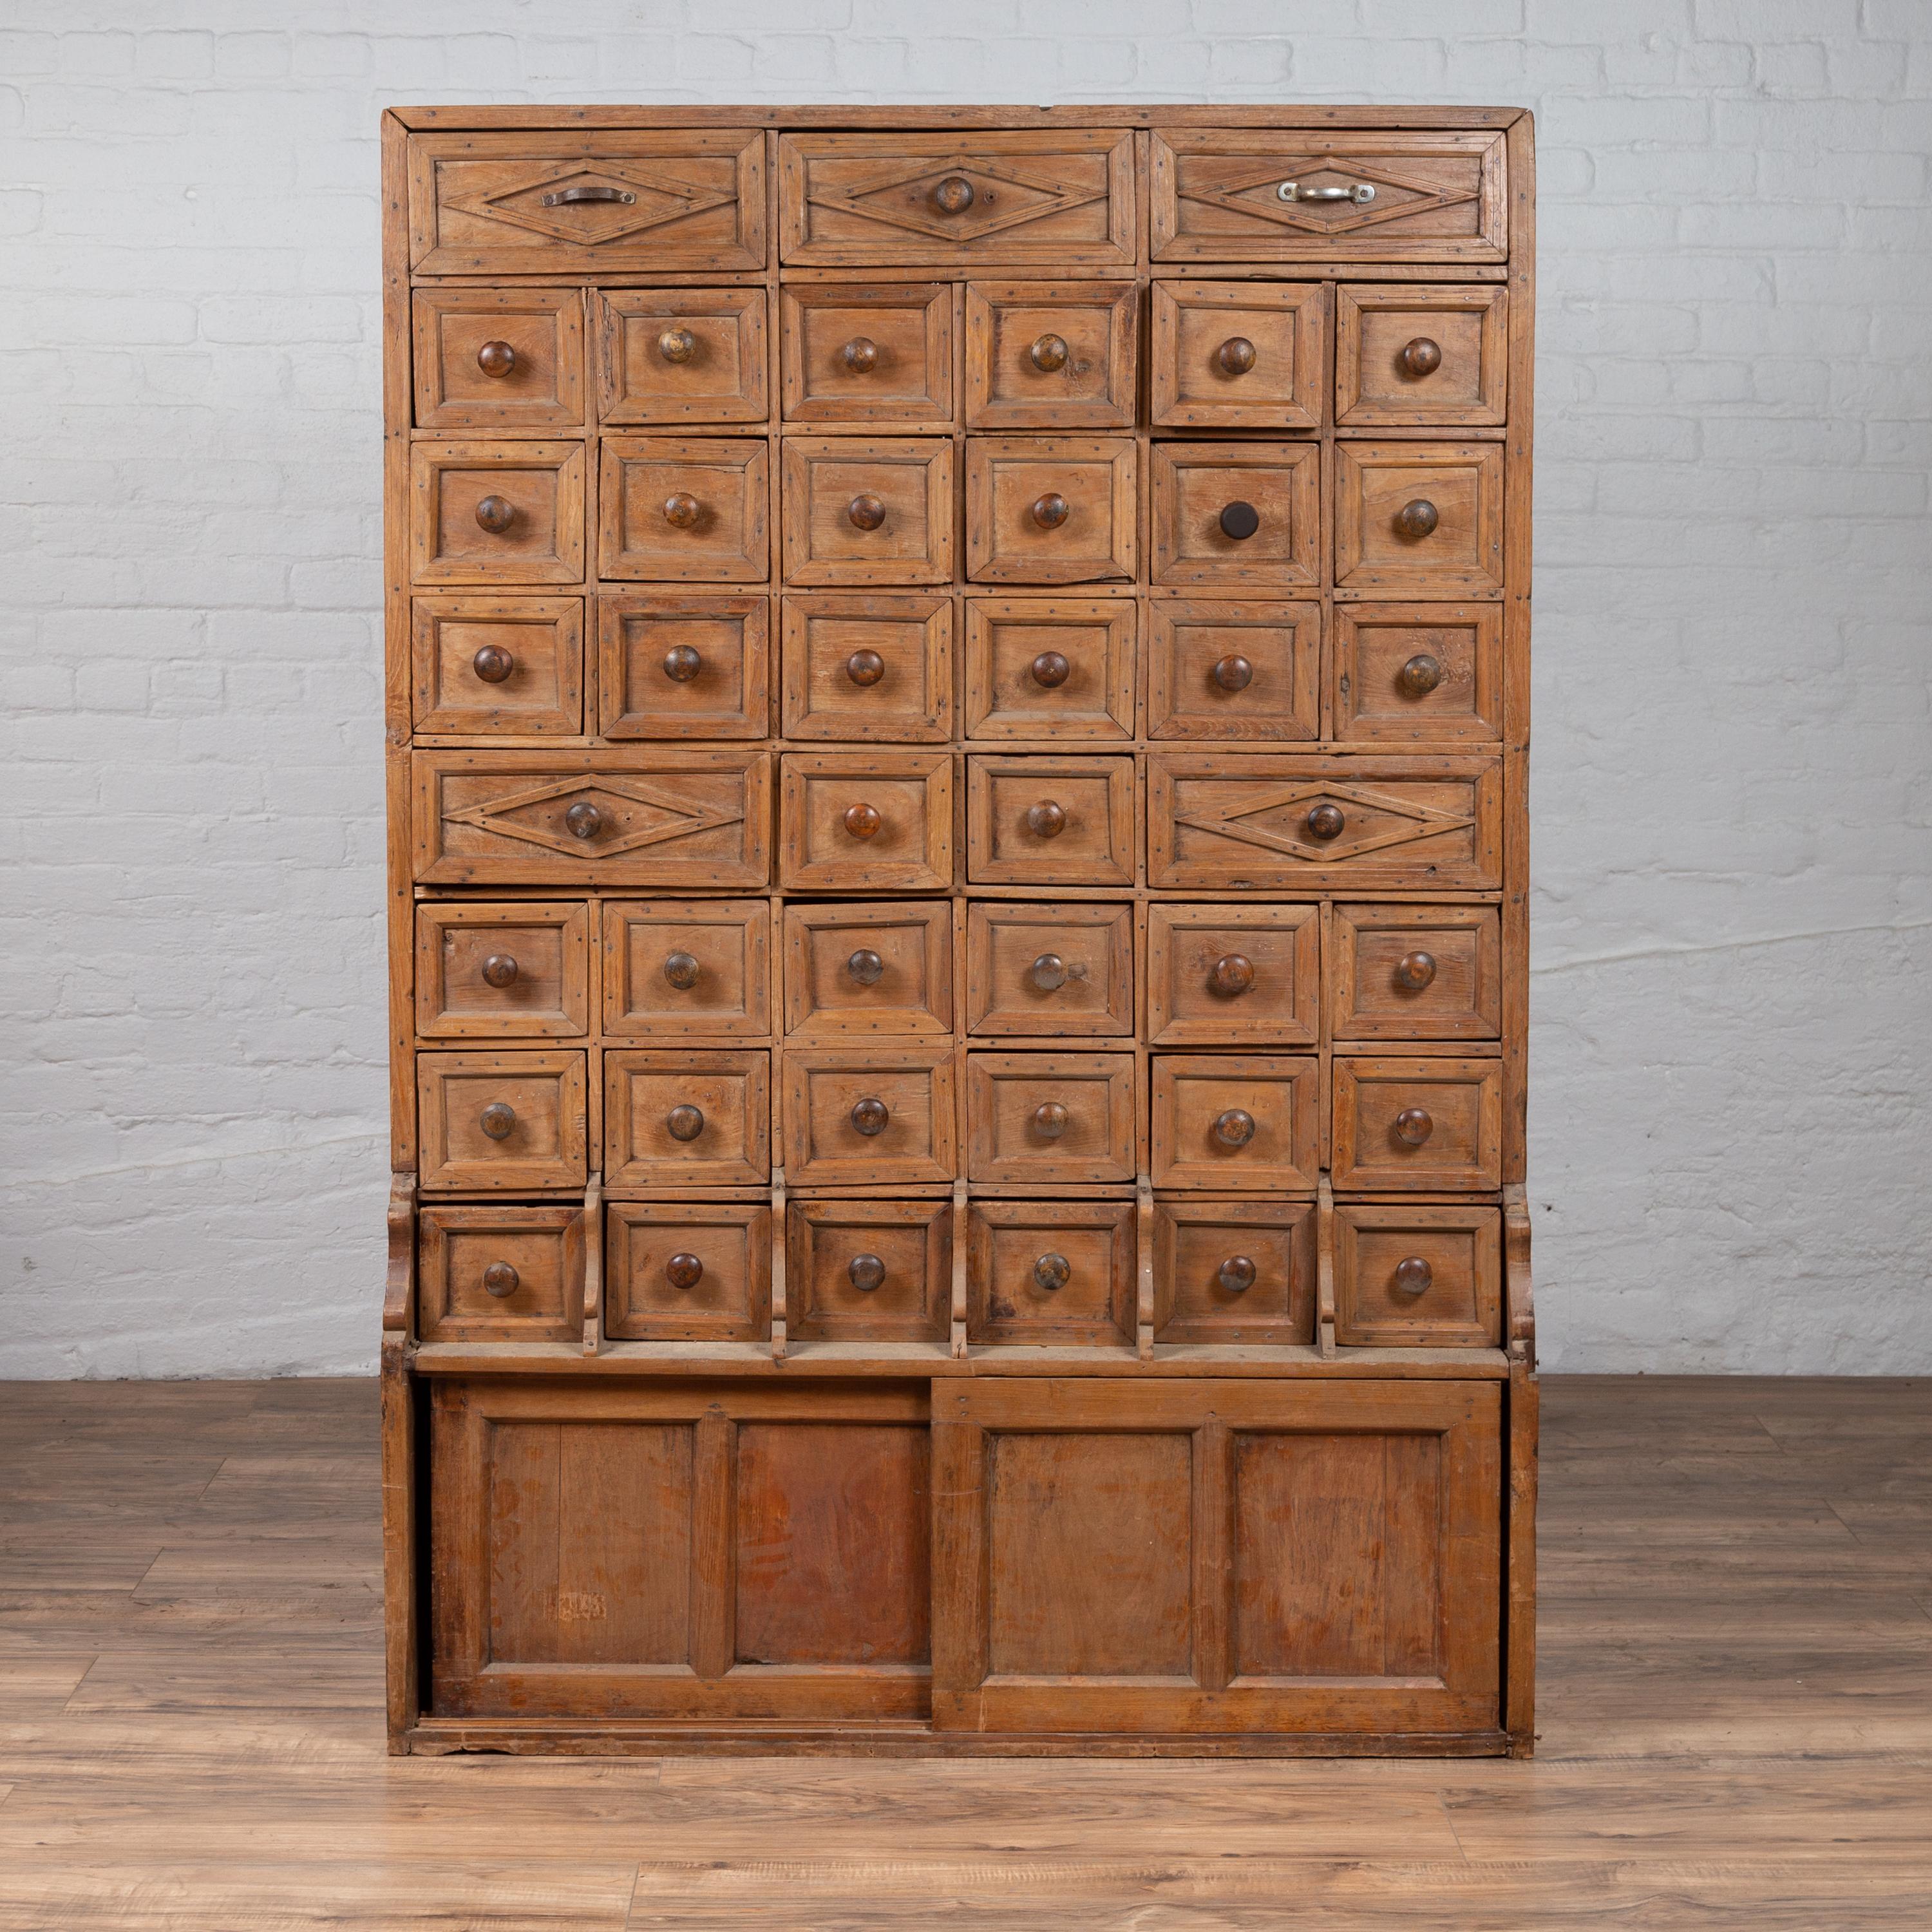 A rare Indian tall apothecary cabinet from the early 20th century, with multiple drawers and sliding doors. Born in India during the early years of the 20th century, this elegant apothecary cabinet features three drawers at the top, adorned with